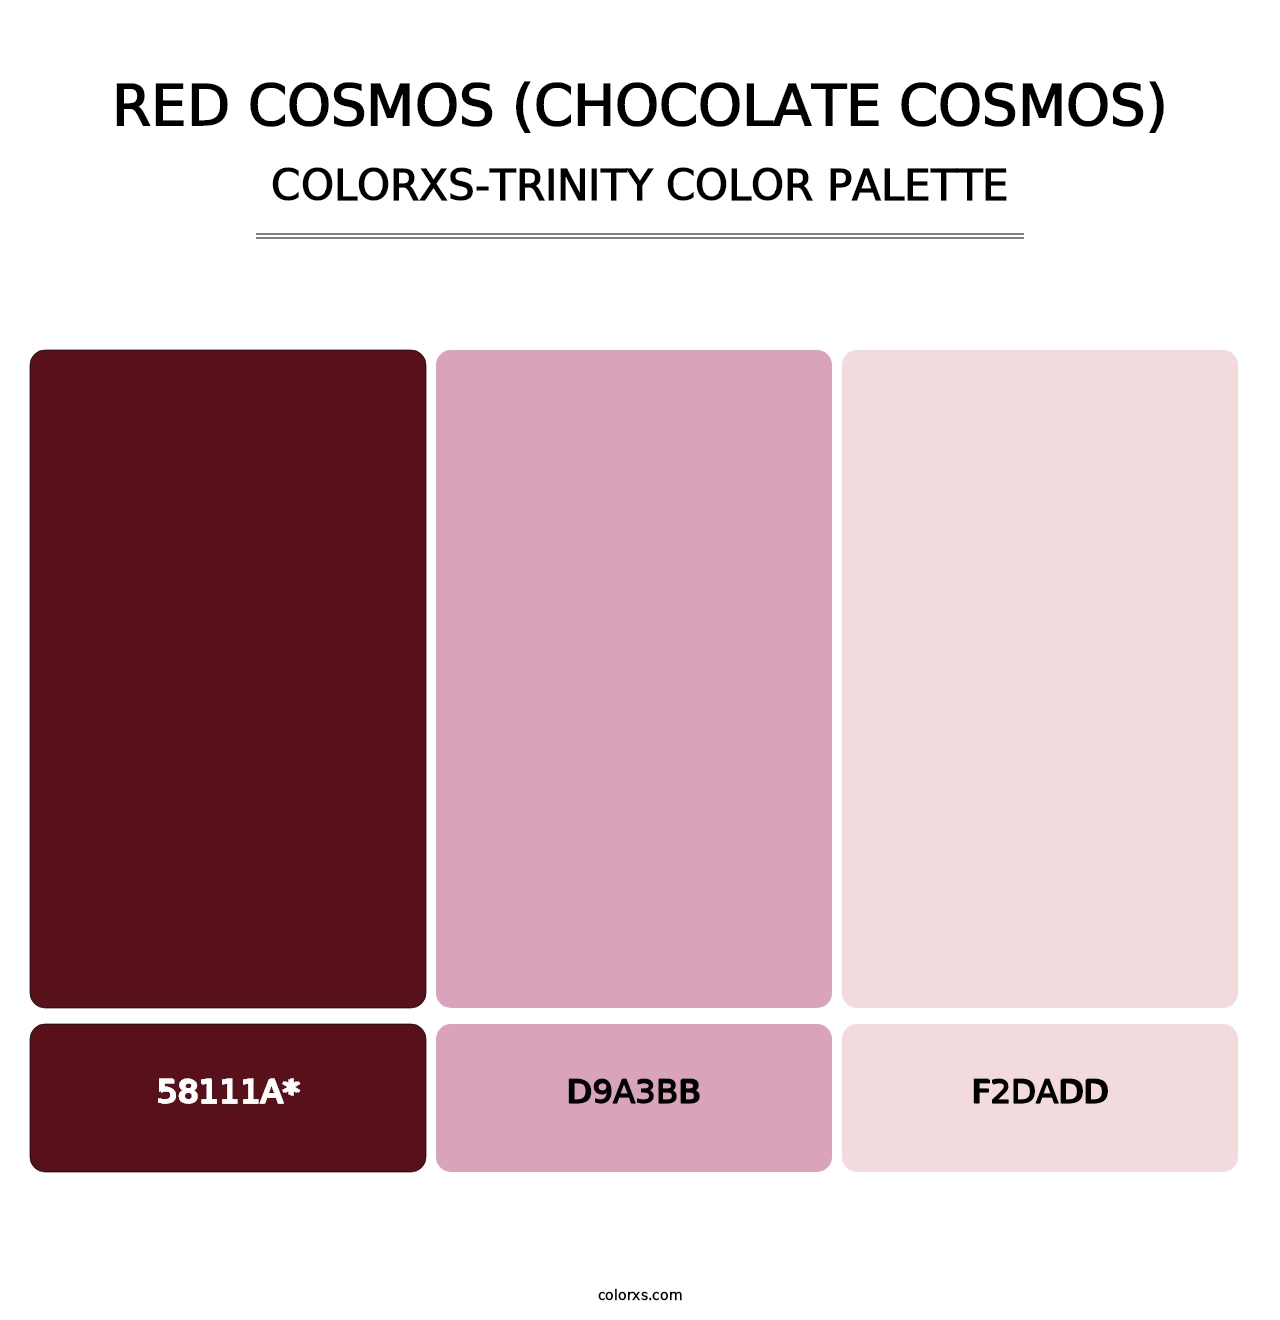 Red Cosmos (Chocolate Cosmos) - Colorxs Trinity Palette